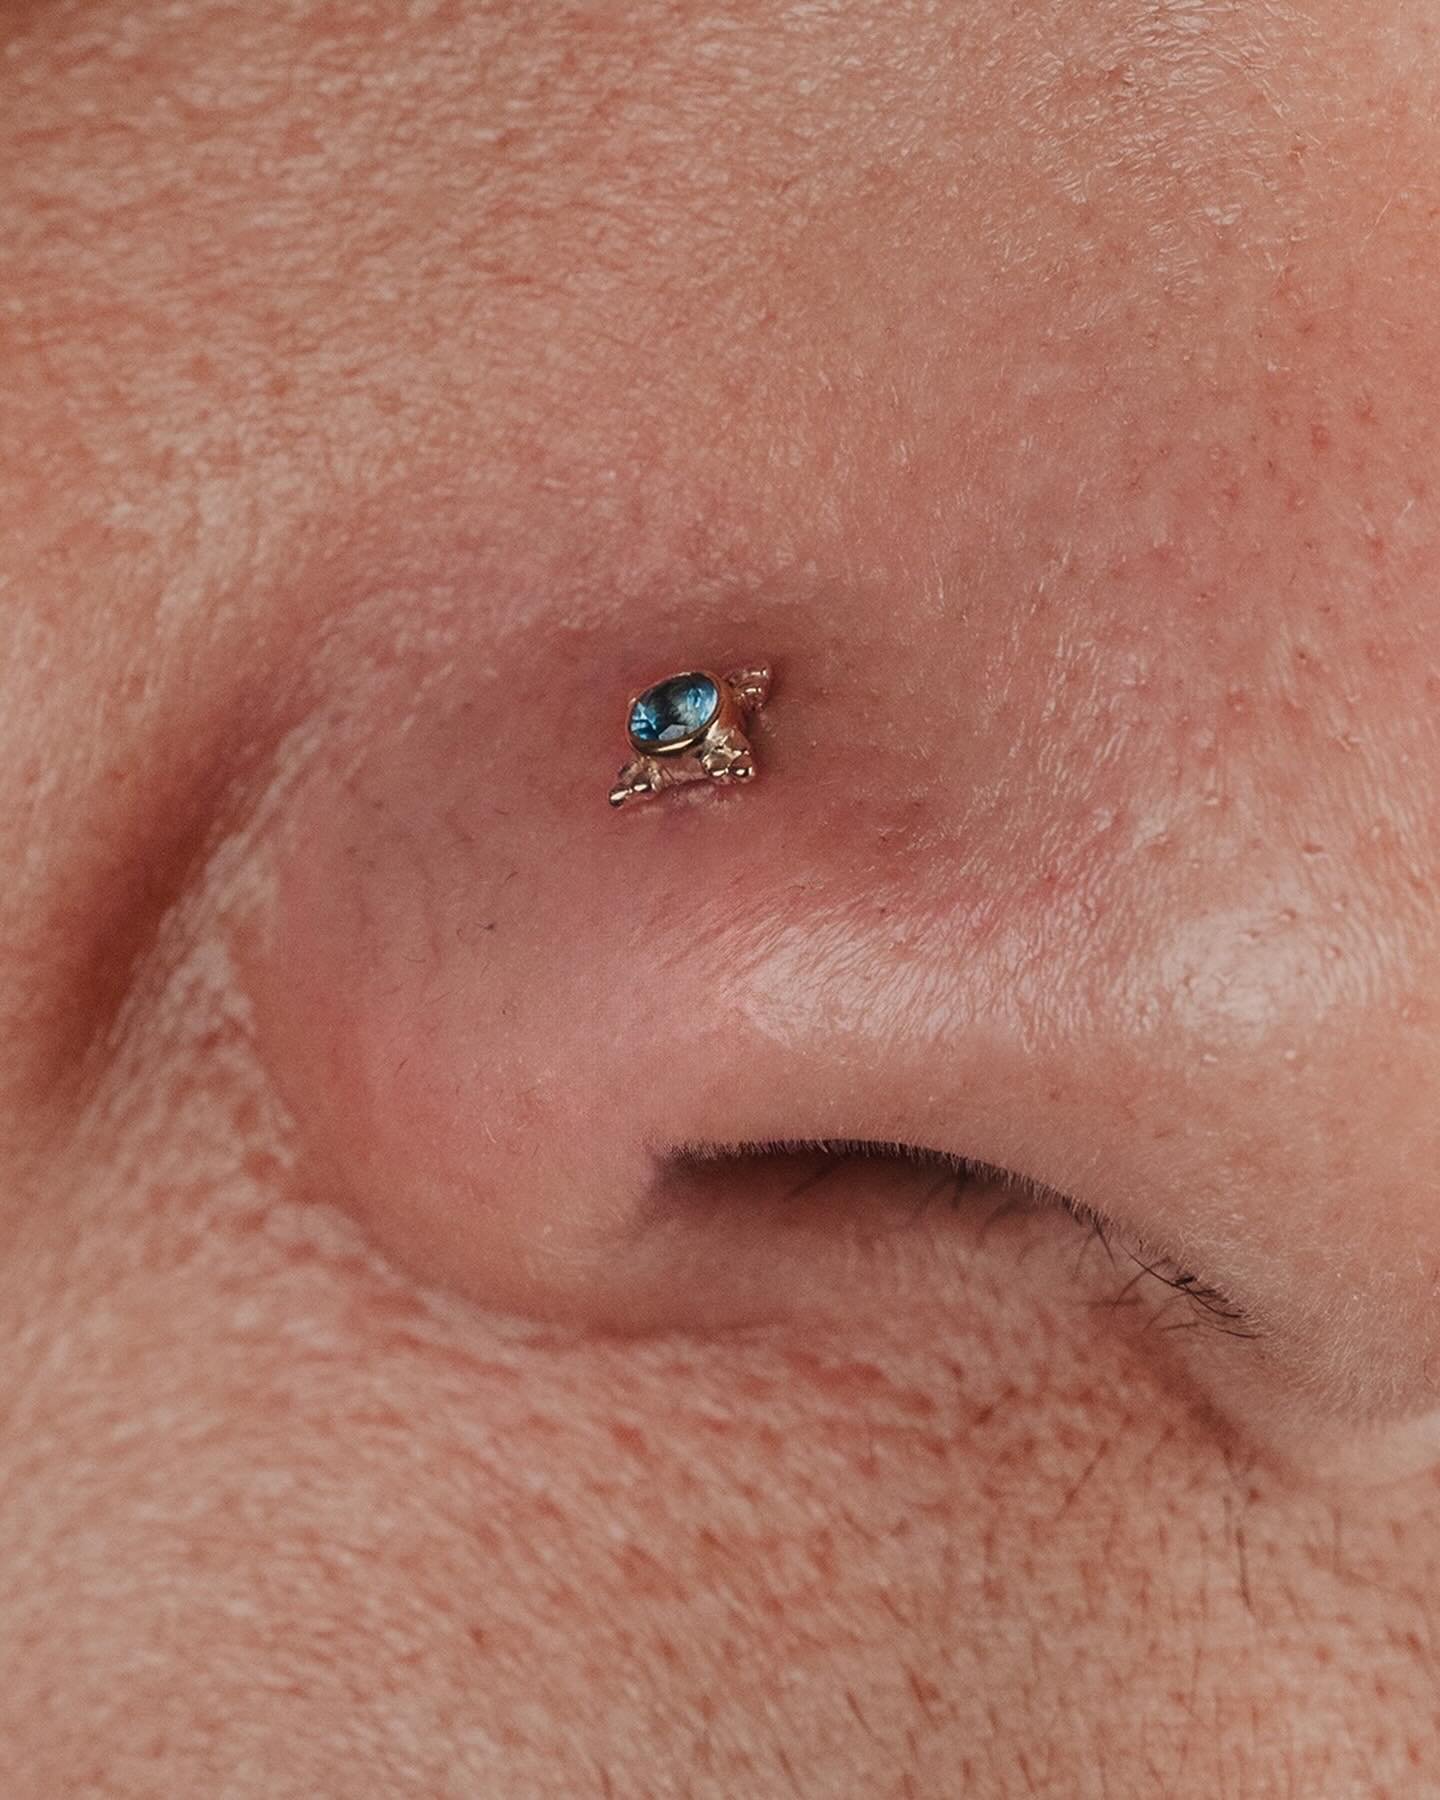 I DO BELIEVE☀️
 
THAT IT&rsquo;S TRUE
 
We got to pierce this client&rsquo;s nostril with a blue topaz &ldquo;Mini Kandy&rdquo; and the bright colors match her wonderful smile so well🦋💫

~ @research.chemicals ~⠀⠀⠀⠀⠀⠀⠀⠀⠀

~  @bvla ~
⠀⠀⠀⠀⠀⠀⠀⠀⠀
⠀⠀⠀⠀⠀⠀